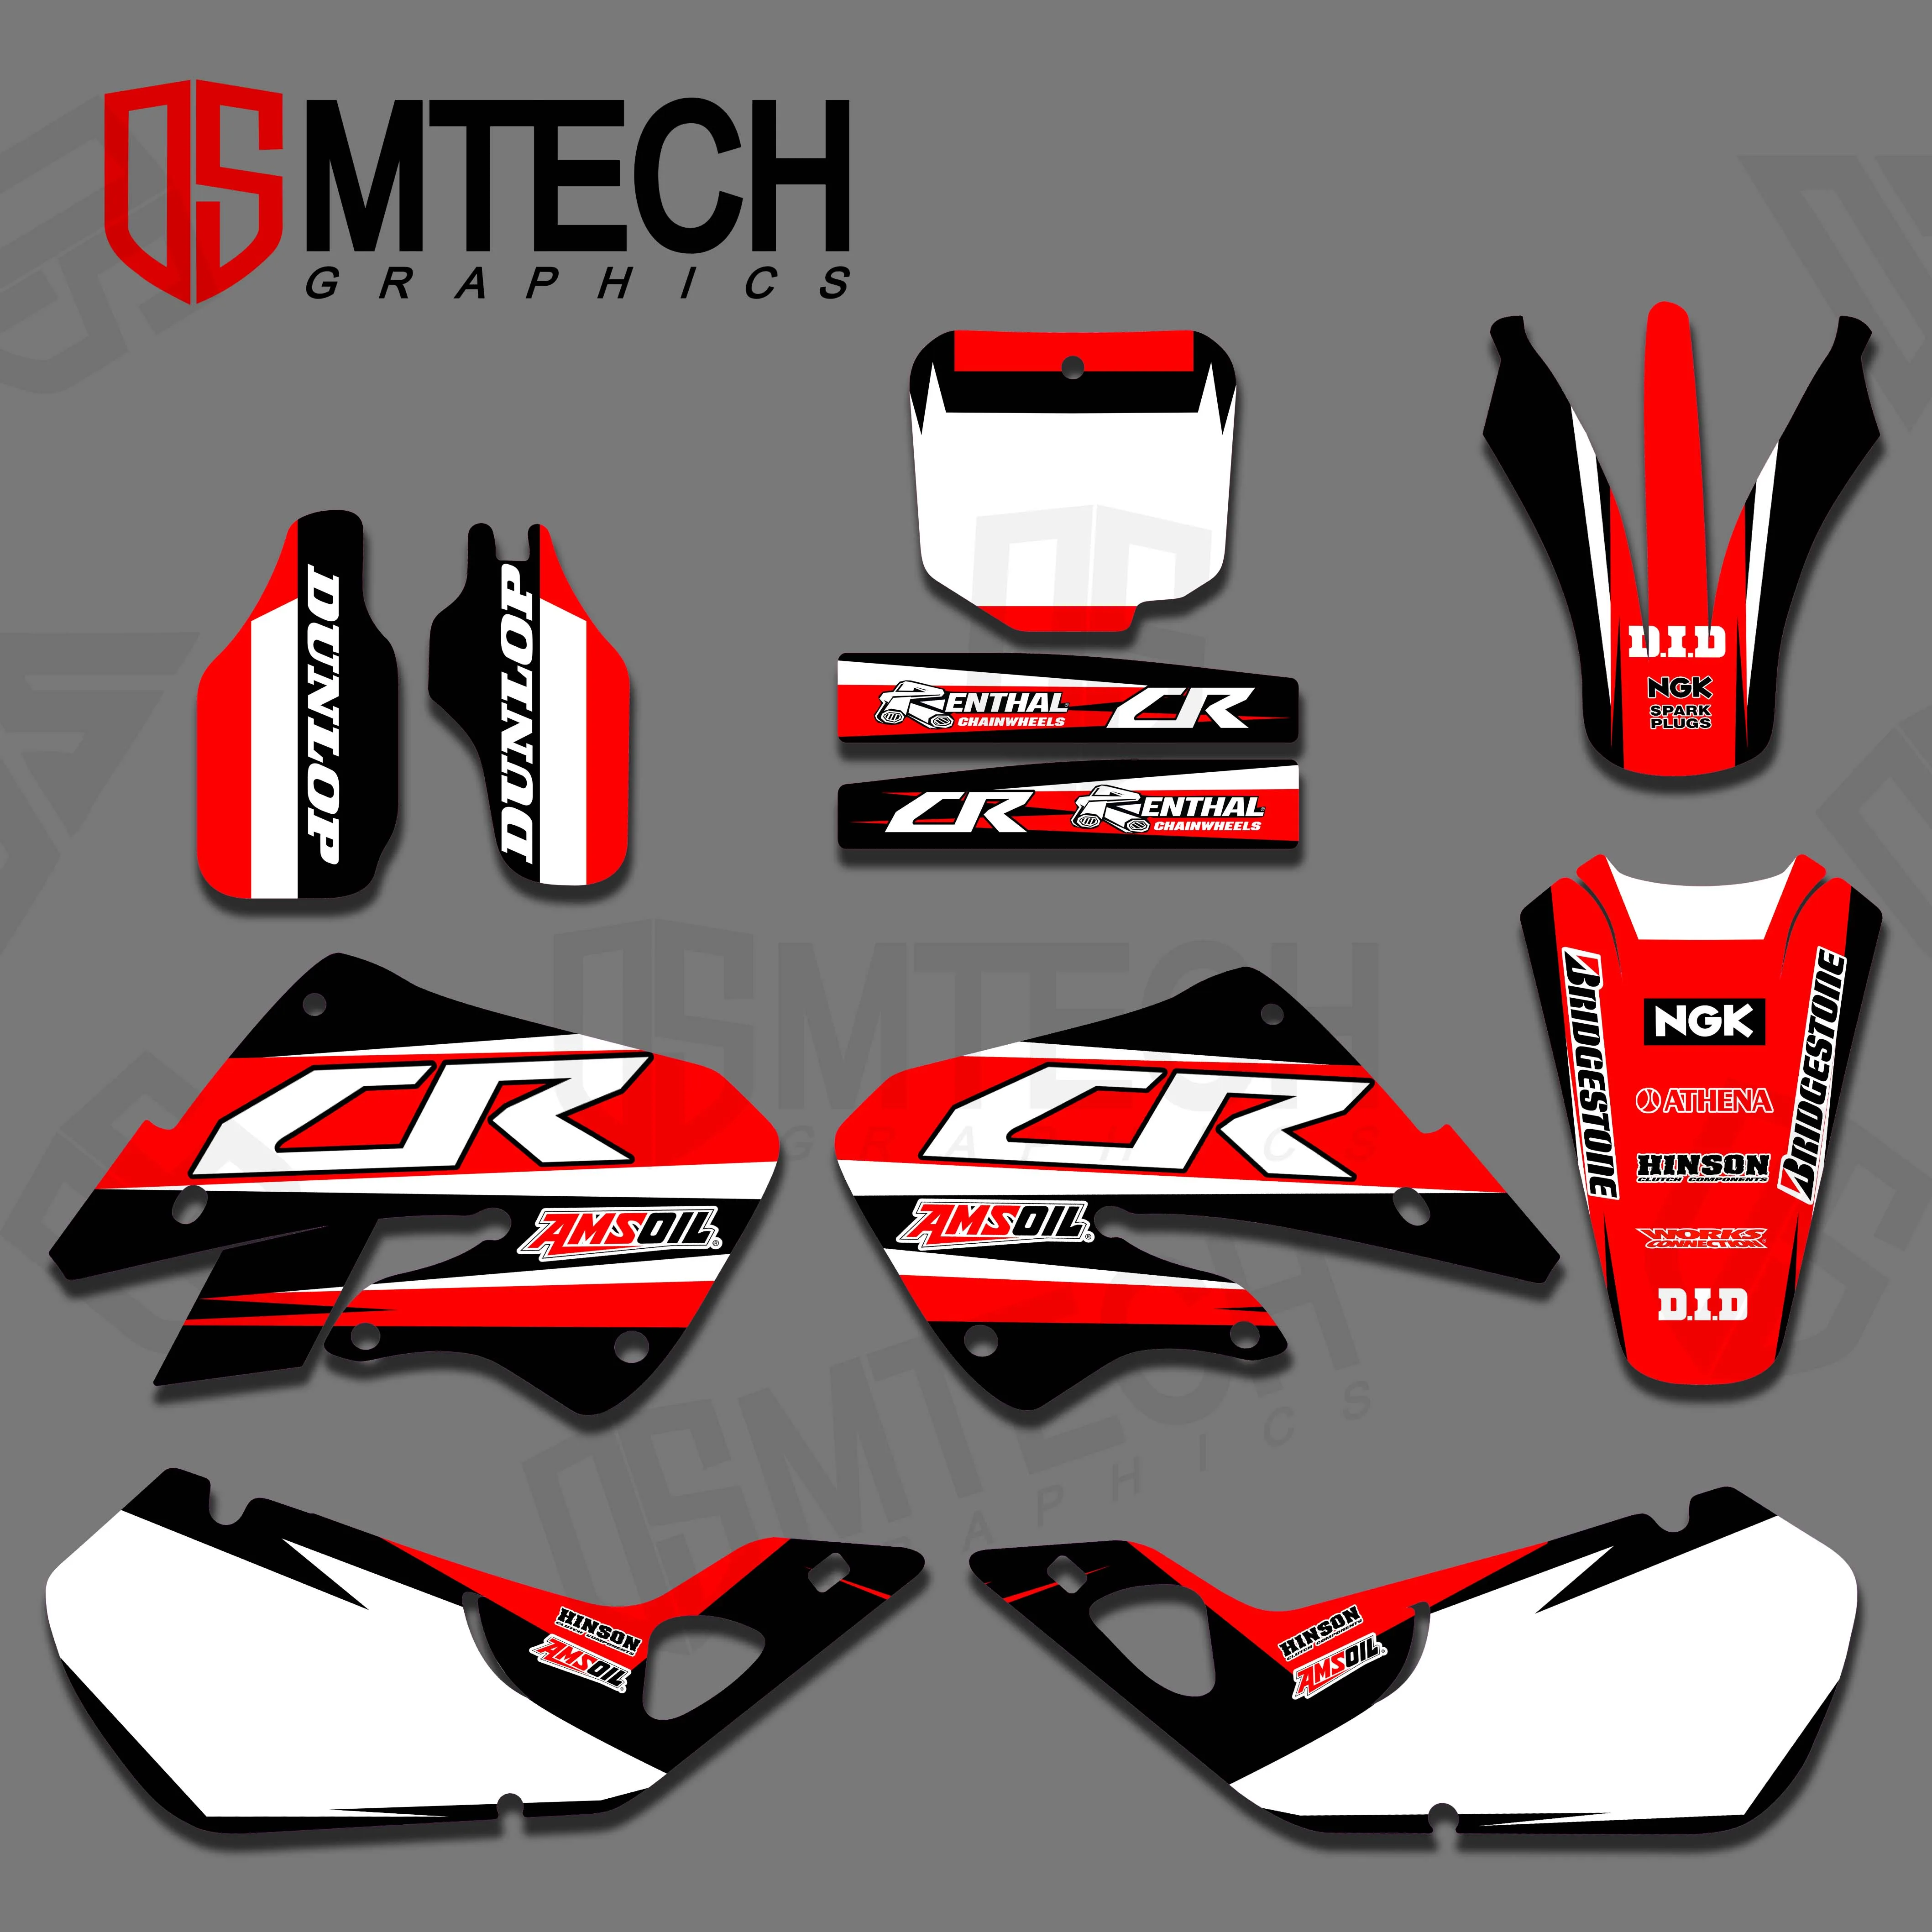 DSMTECH Nen Style Red &White TEAM DECALS GRAPHICS & BACKGROUNDS Stickers For Honda CR125 CR250 1997 1998 1999 CR 125 250